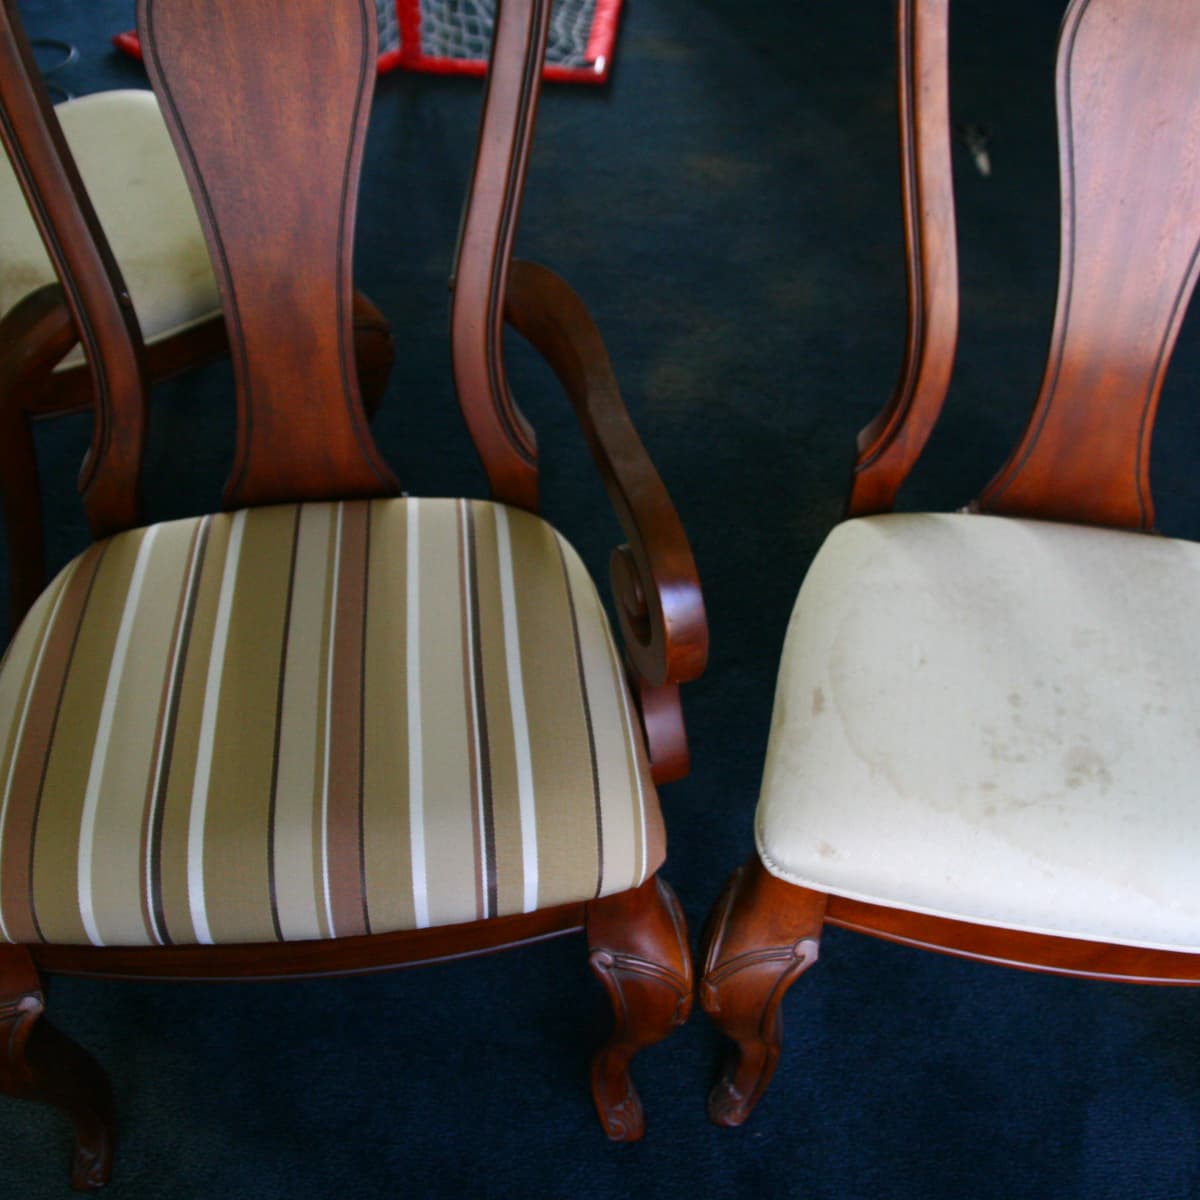 How To Reupholster A Dining Room Chair, How Much Would It Cost To Reupholster A Leather Chair